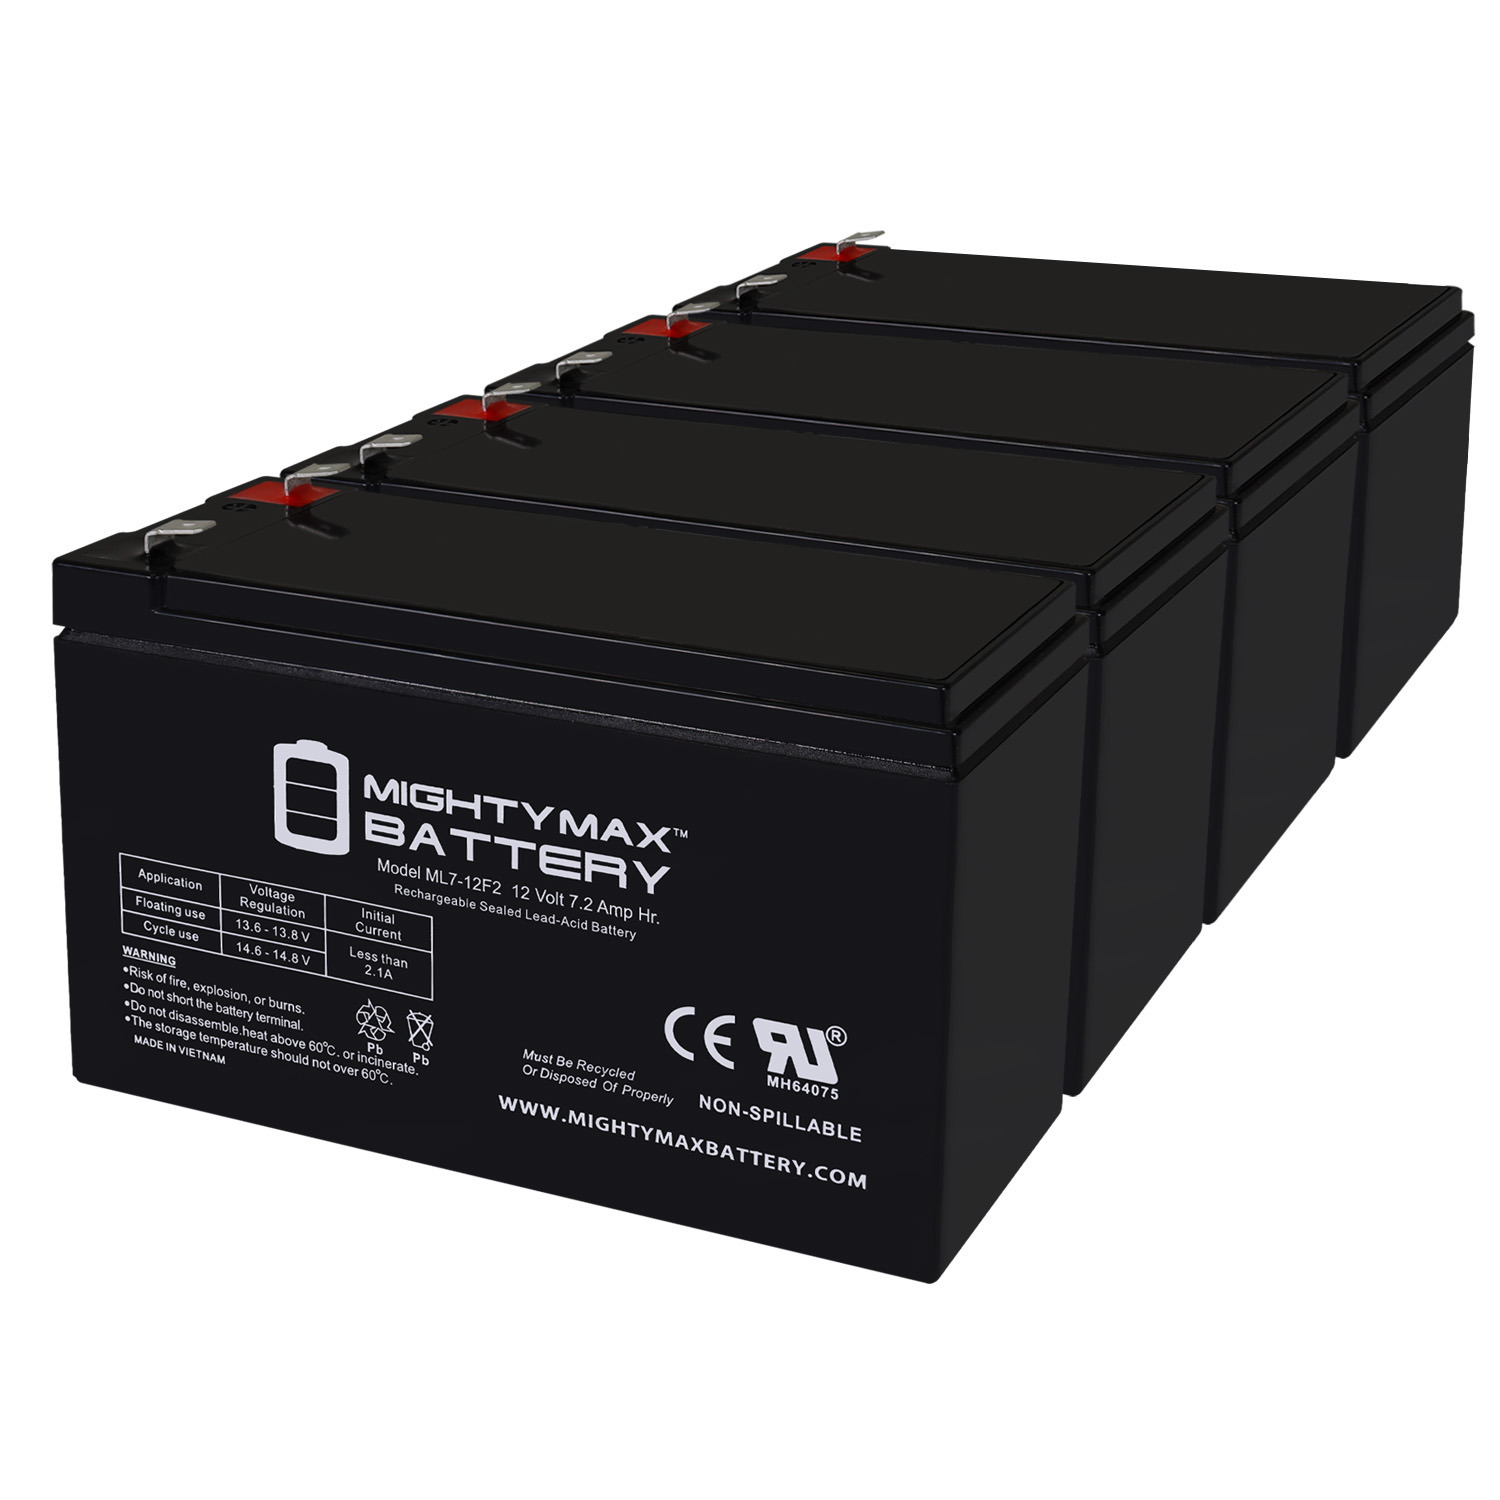 12V 7Ah F2 Replacement Battery for Enduring MH20567 - 4 Pack